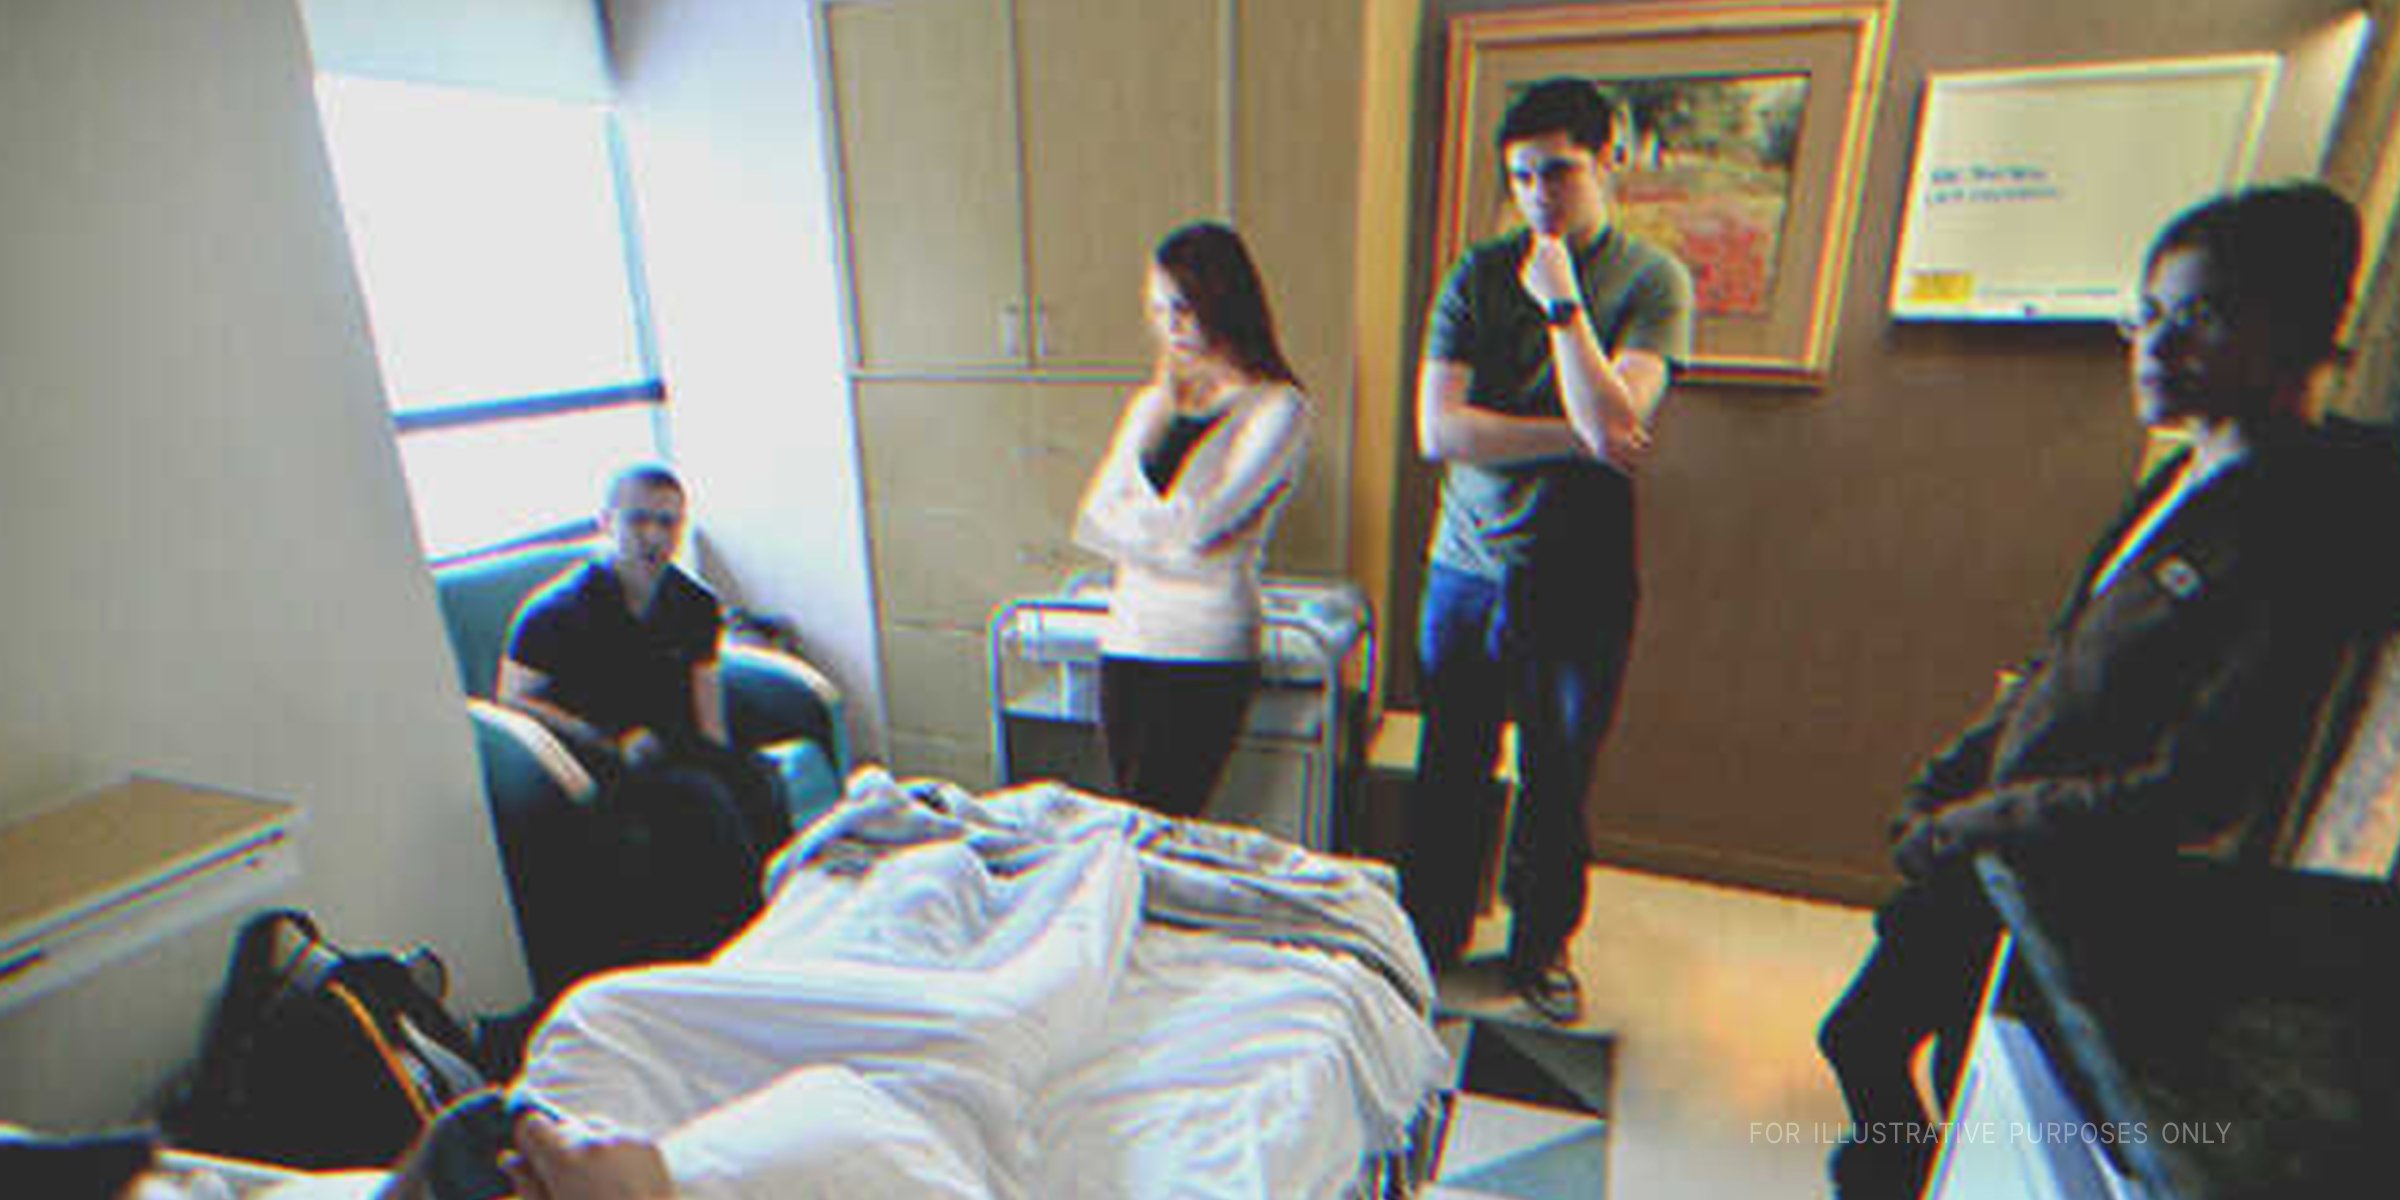 Teenagers visiting a patient in a hospital | Source: Flickr / nateOne (CC BY 2.0) Shutterstock